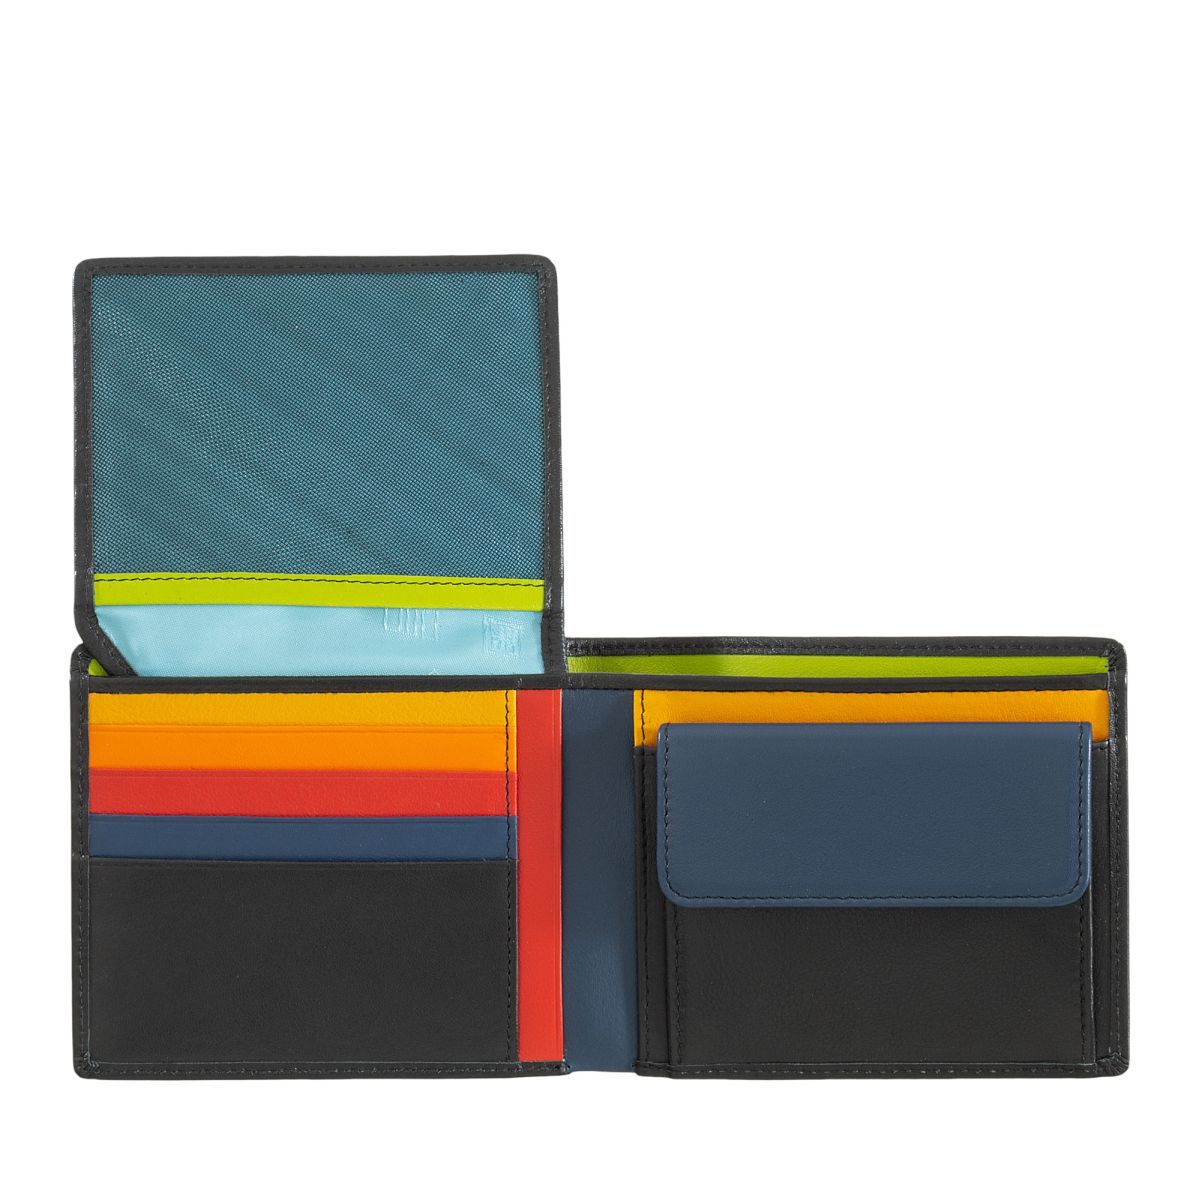 Leather classic multi color wallet with coin purse and inside flap - Black